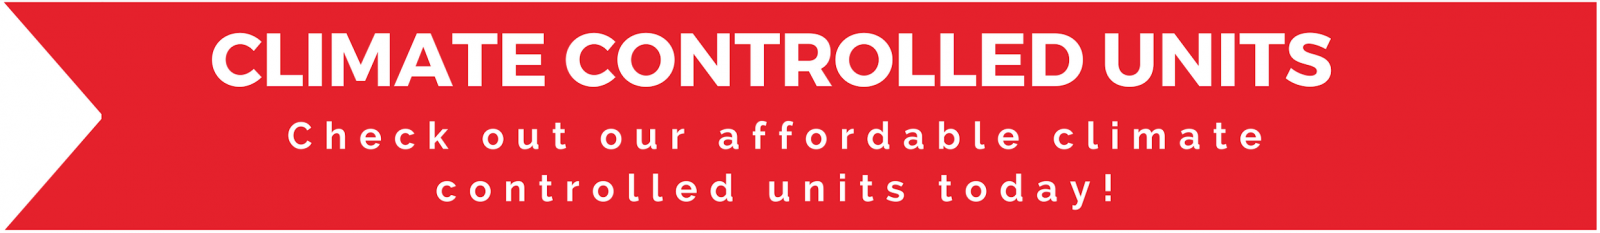 Climate-Controlled Units banner